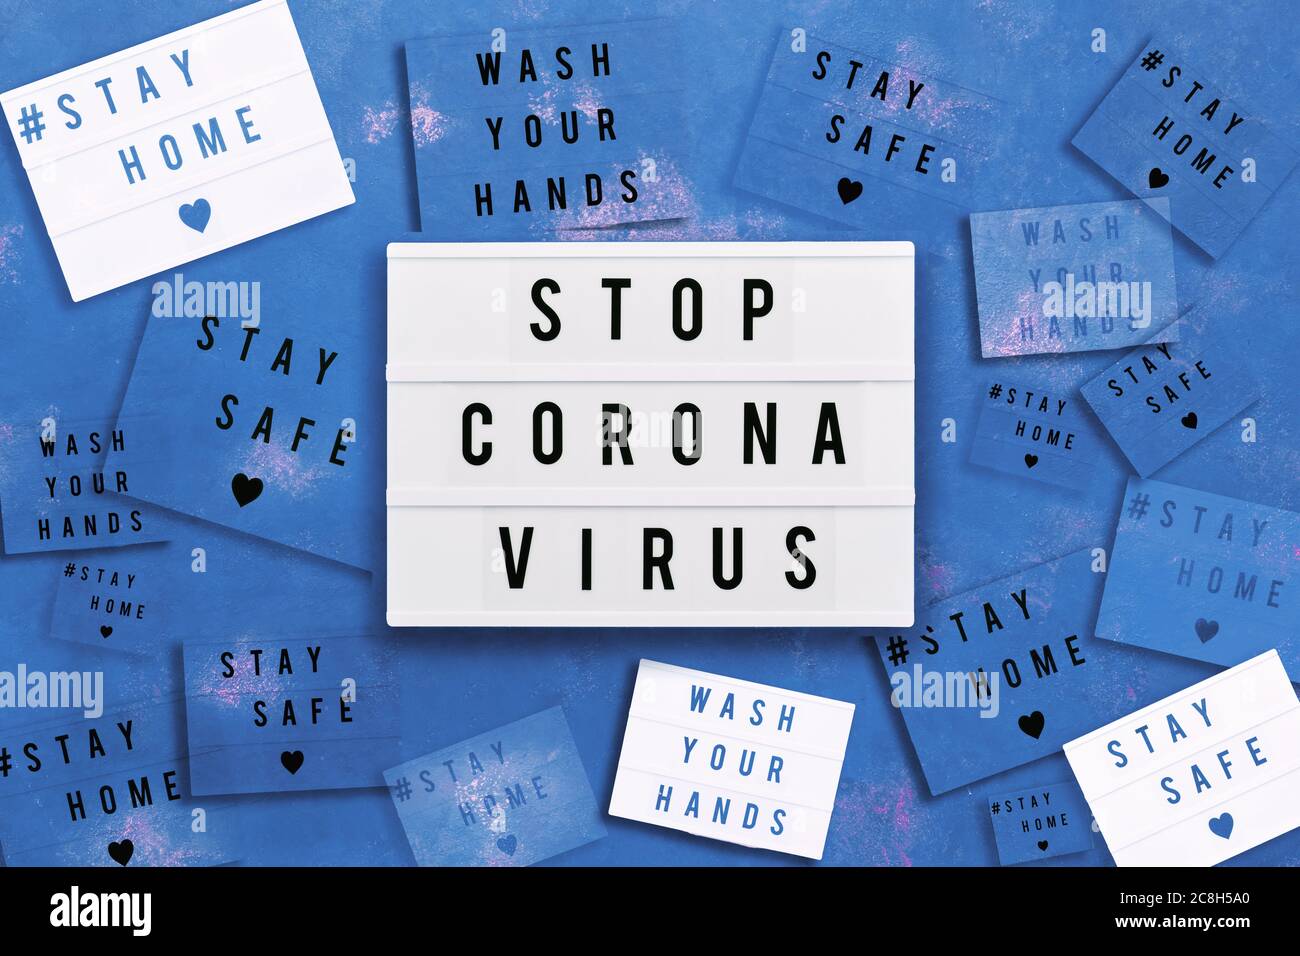 STOP CORONA VIRUS, STAY HOME, STAY SAFE and WASH YOUR HANDS written in light box on blue background. Healthcare and medical concept. Top view. Quarant Stock Photo